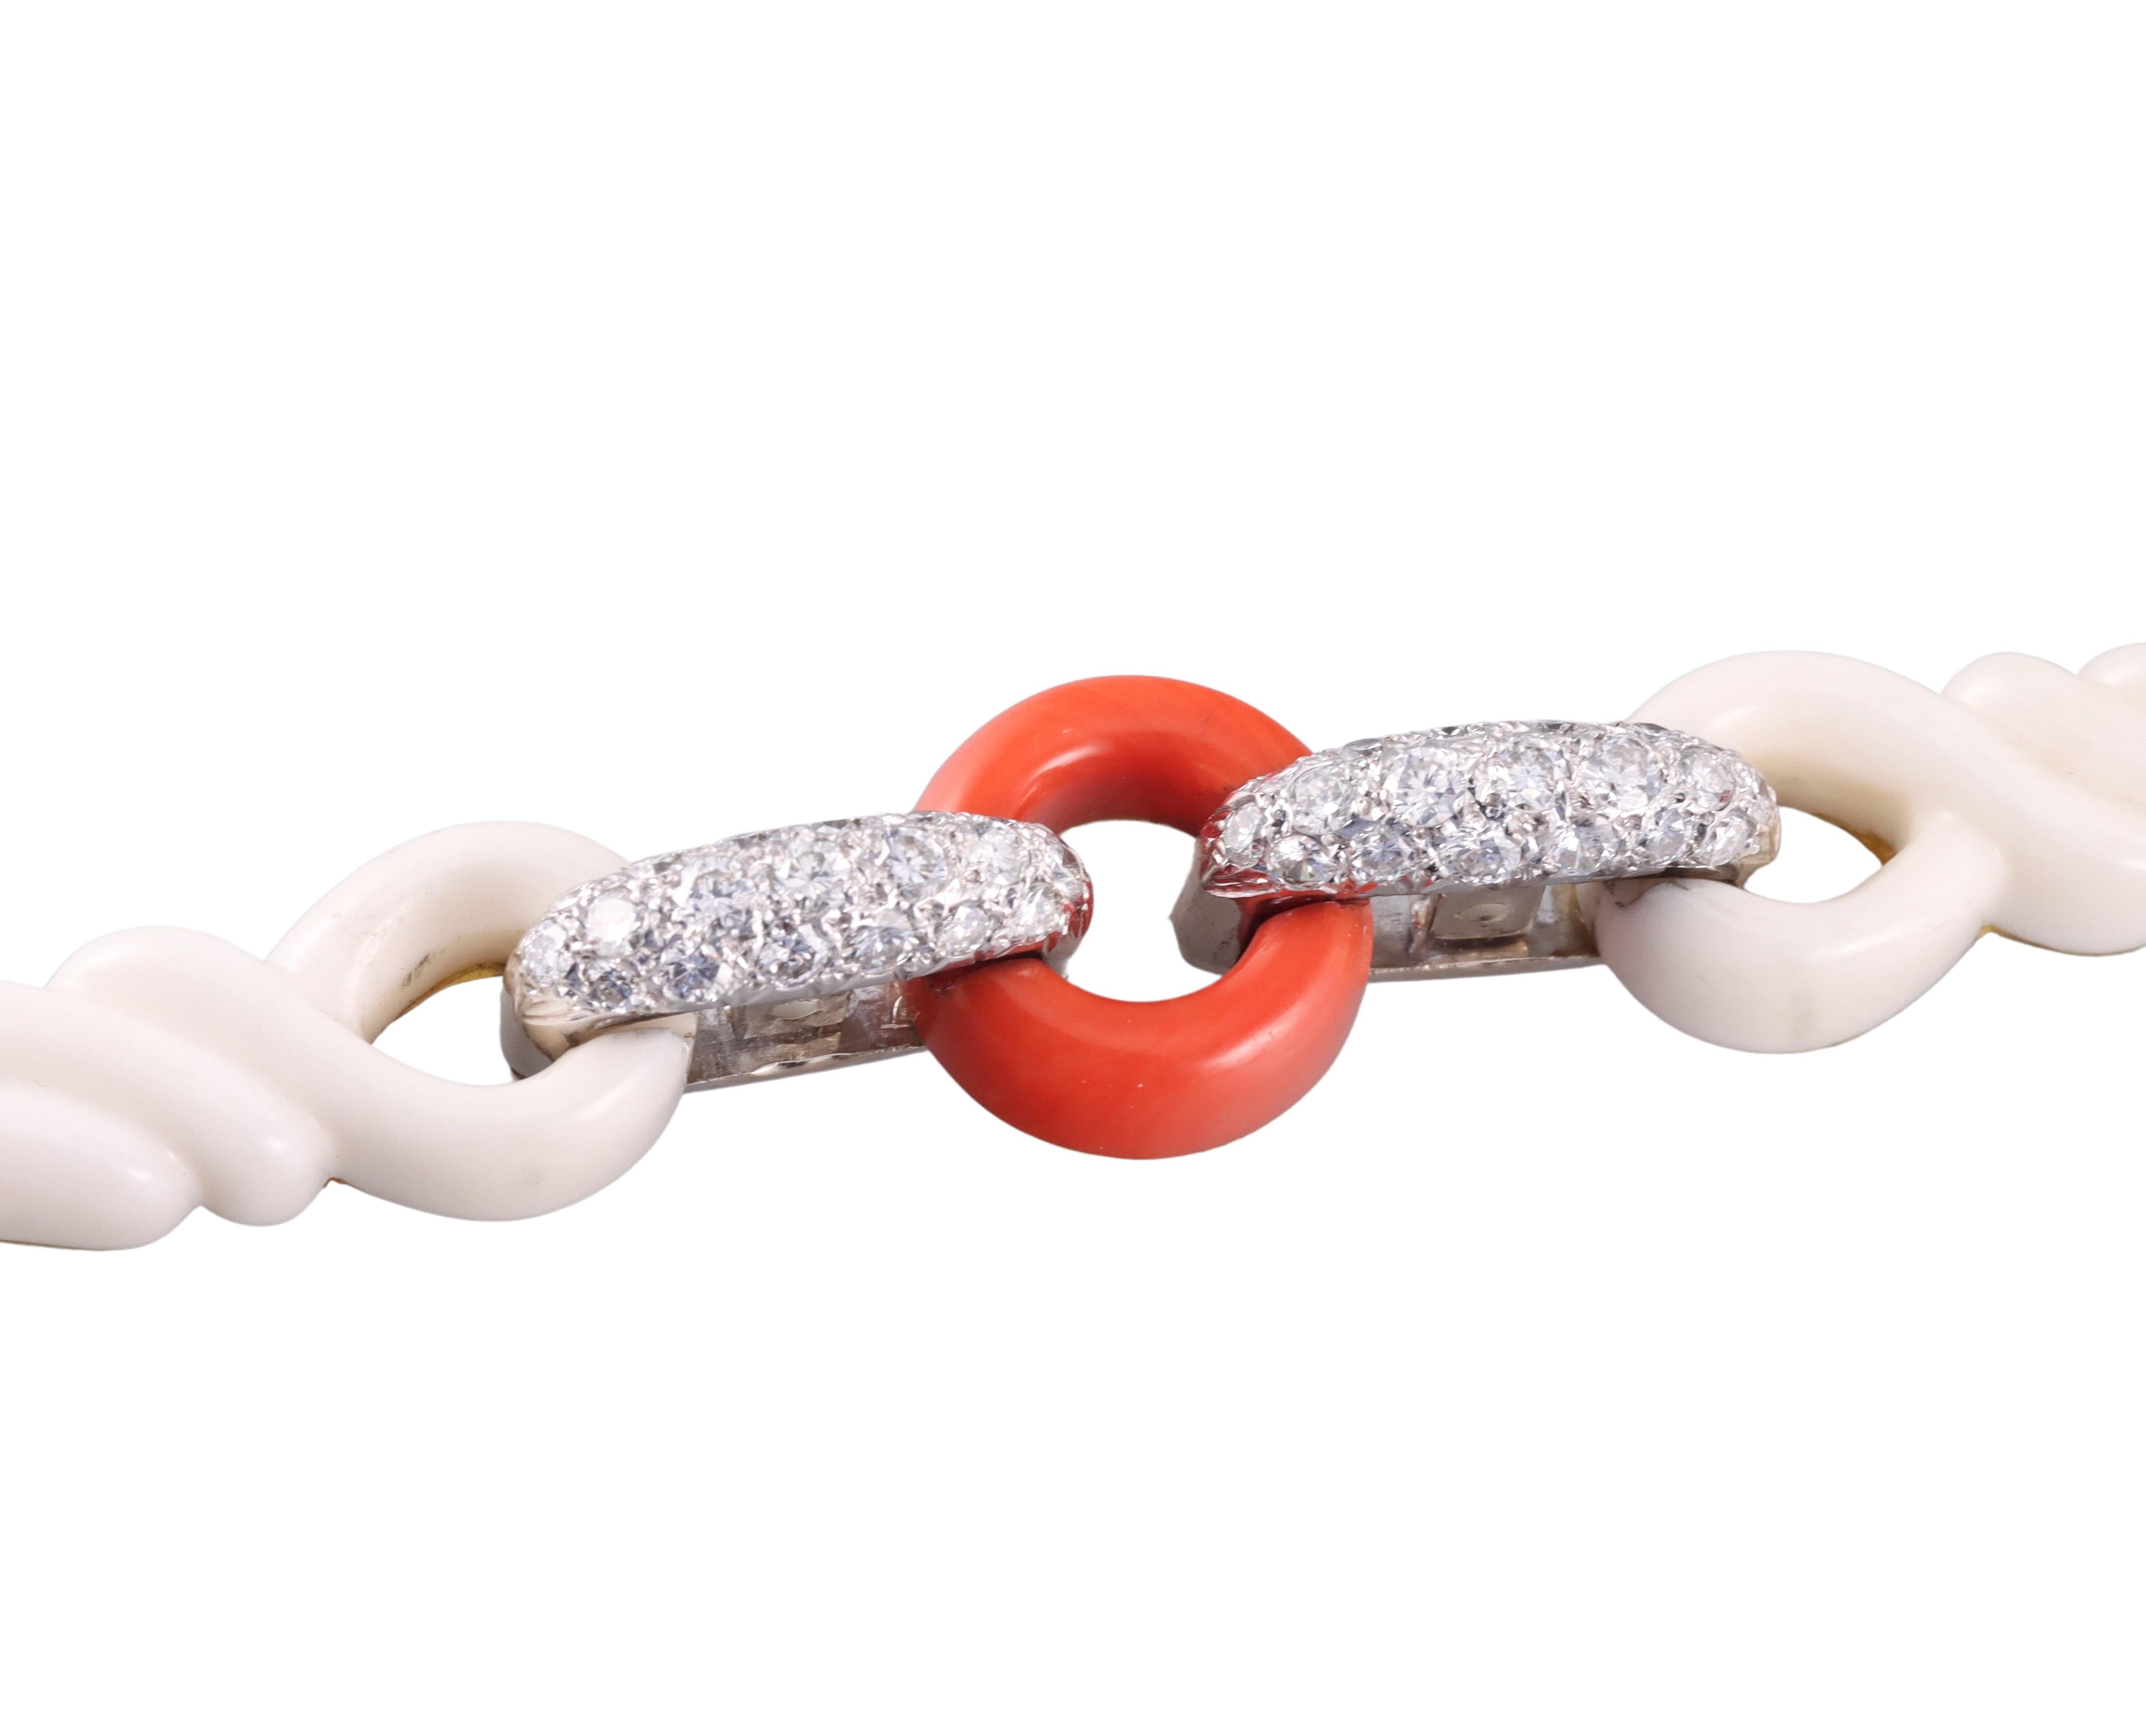 18k yellow and white gold bracelet, featuring alternating carved coral links, adorned with a total 2.60ctw SI1/H diamonds. Bracelet is 7.25